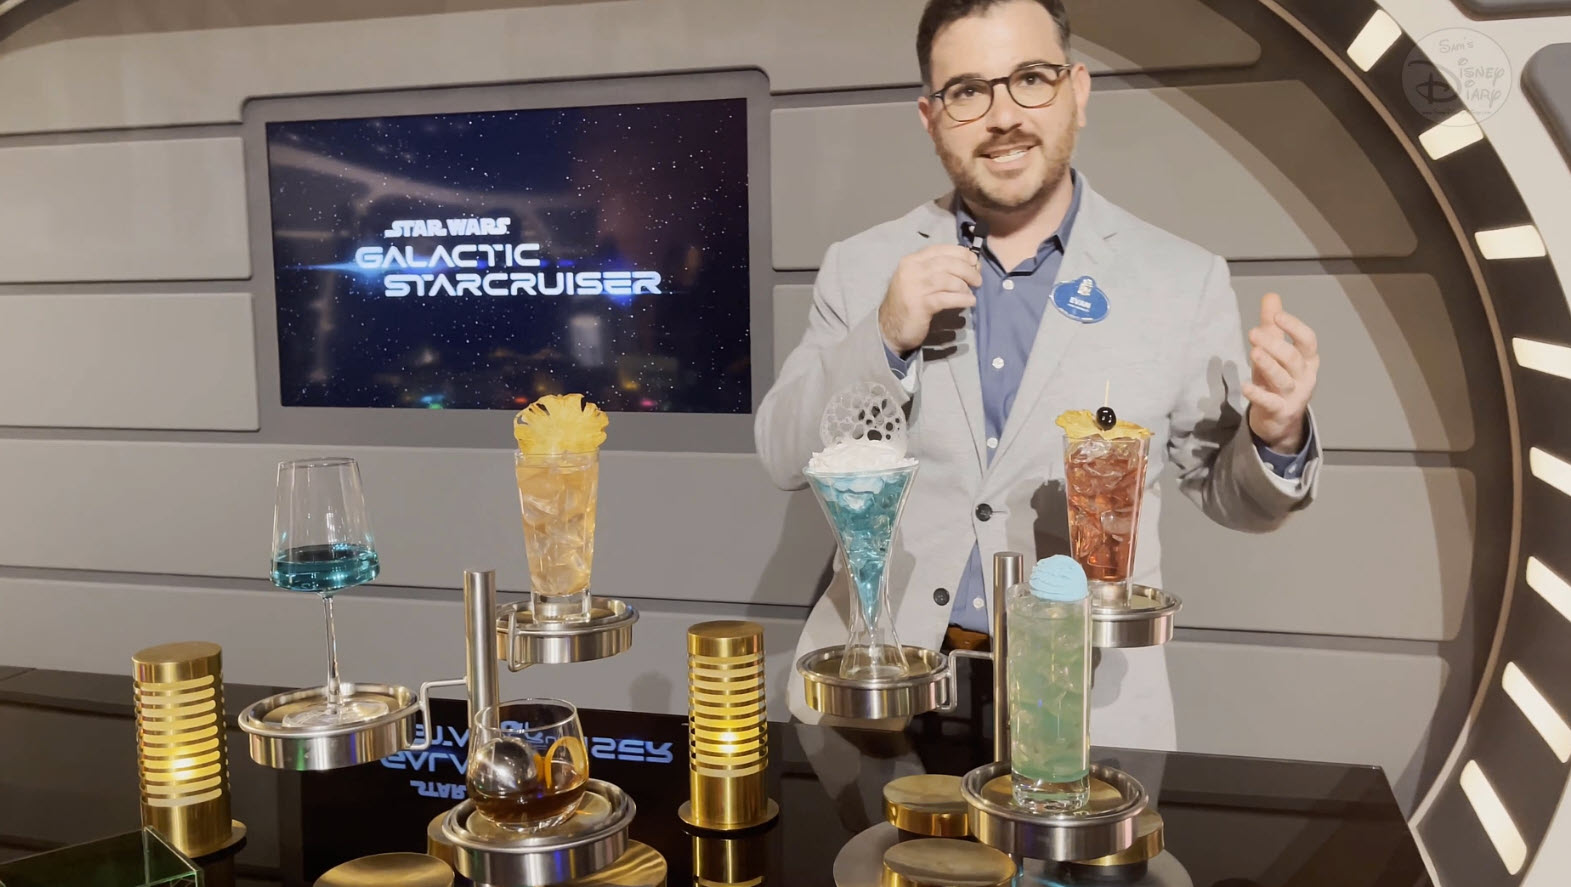 Star Wars Galactic Star Cruiser | Food and Beverage | Dining on the Halcyon | Walt Disney World